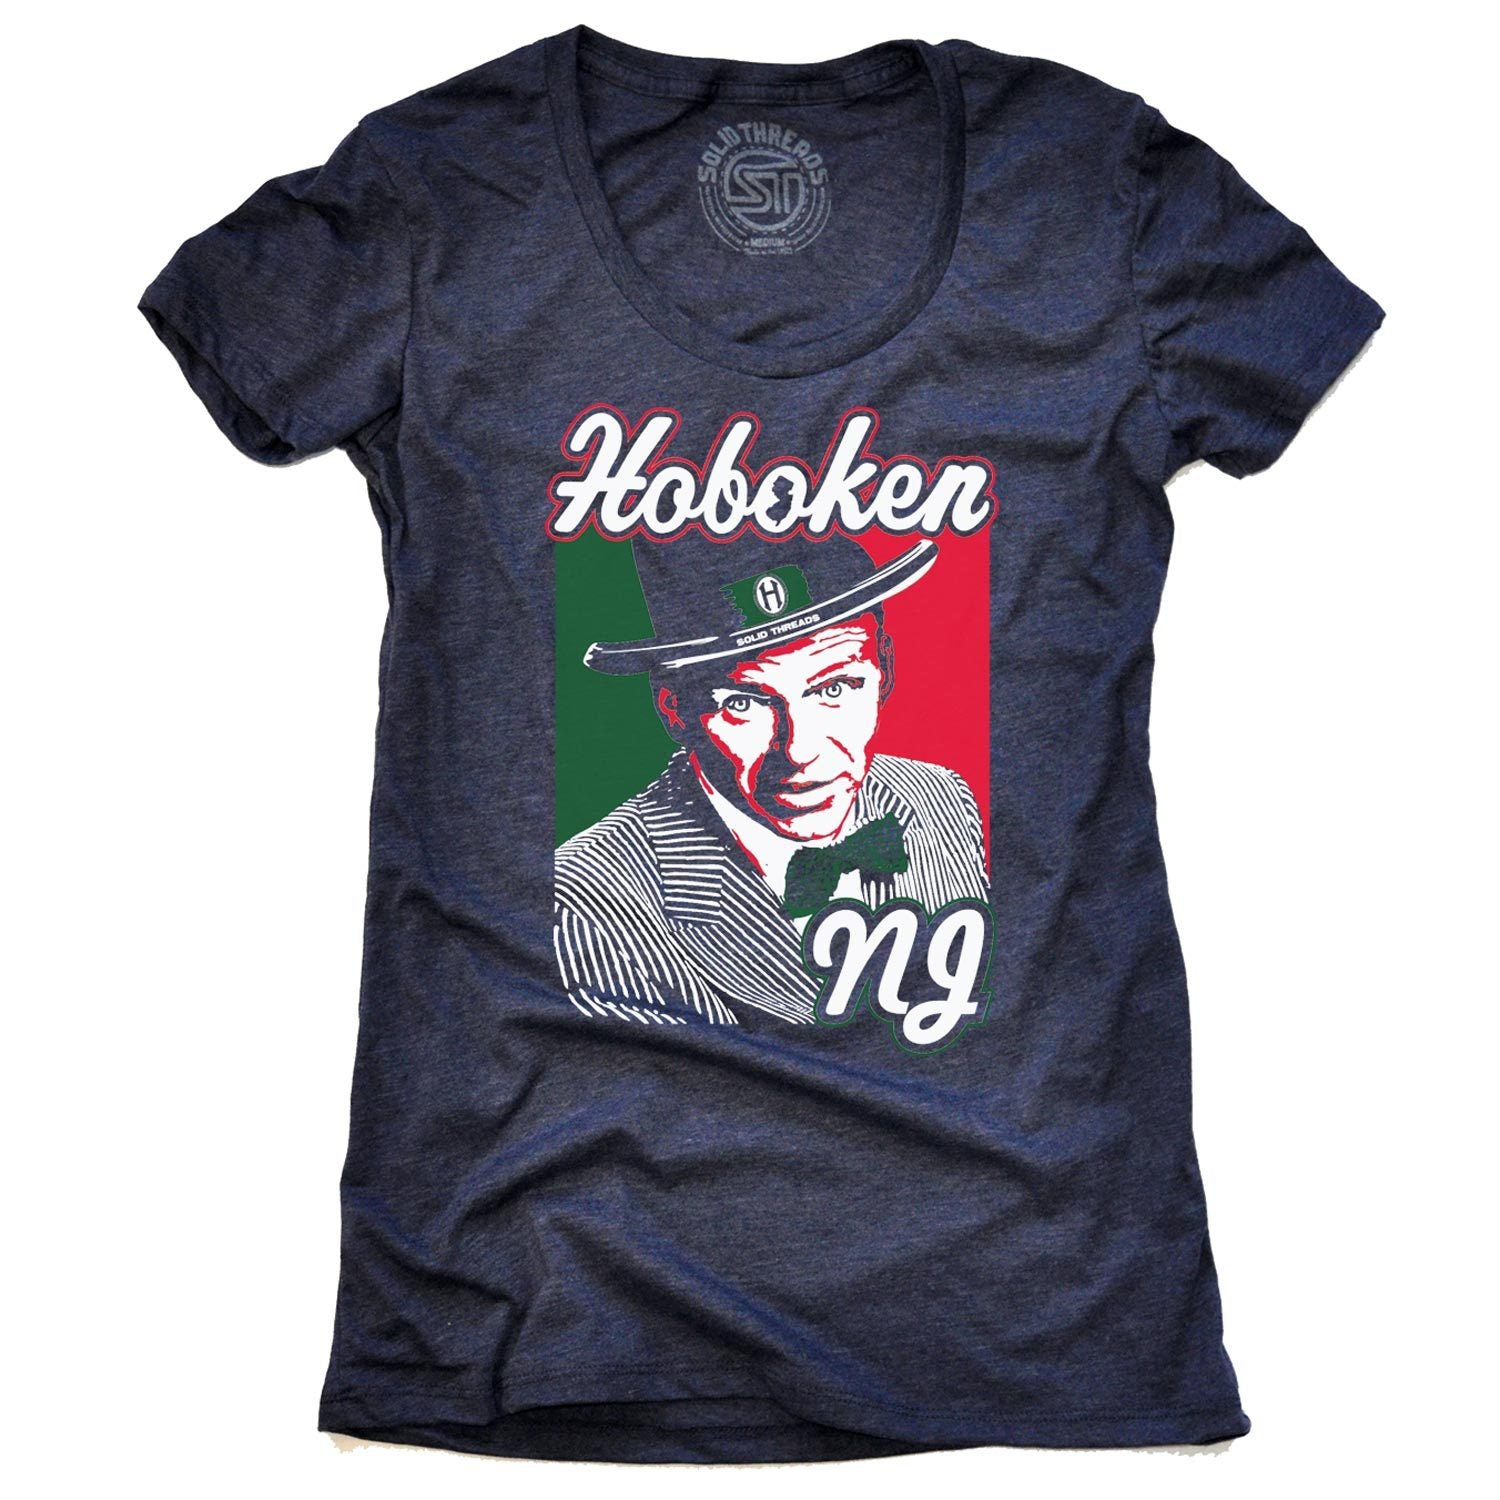 Women's Hoboken Frank Sinatra Cool Graphic T-Shirt | Vintage New Jersey Tee | Solid Threads